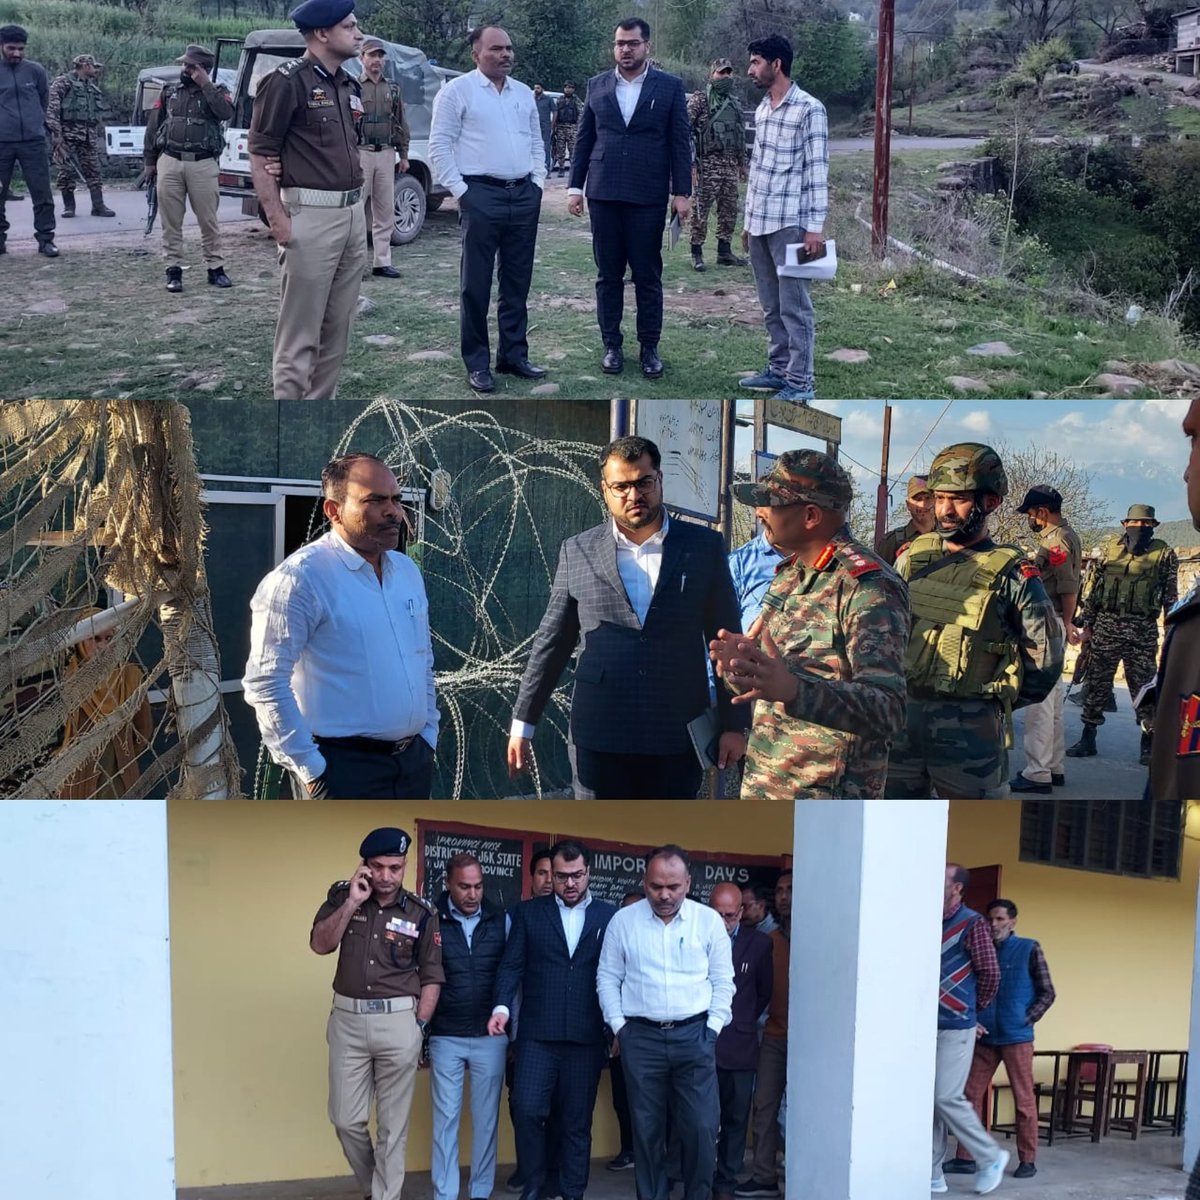 Chief Electoral Officer (CEO) J&K, Pandurang Kondbarao Pole today inspected schools and polling stations in Distt. Poonch to ensure Assured Minimum Facilities (AMF) are at place for voters at polling stations for Lok Sabha Elections 2024. @ceo_UTJK @diprjk @yasinc_ias